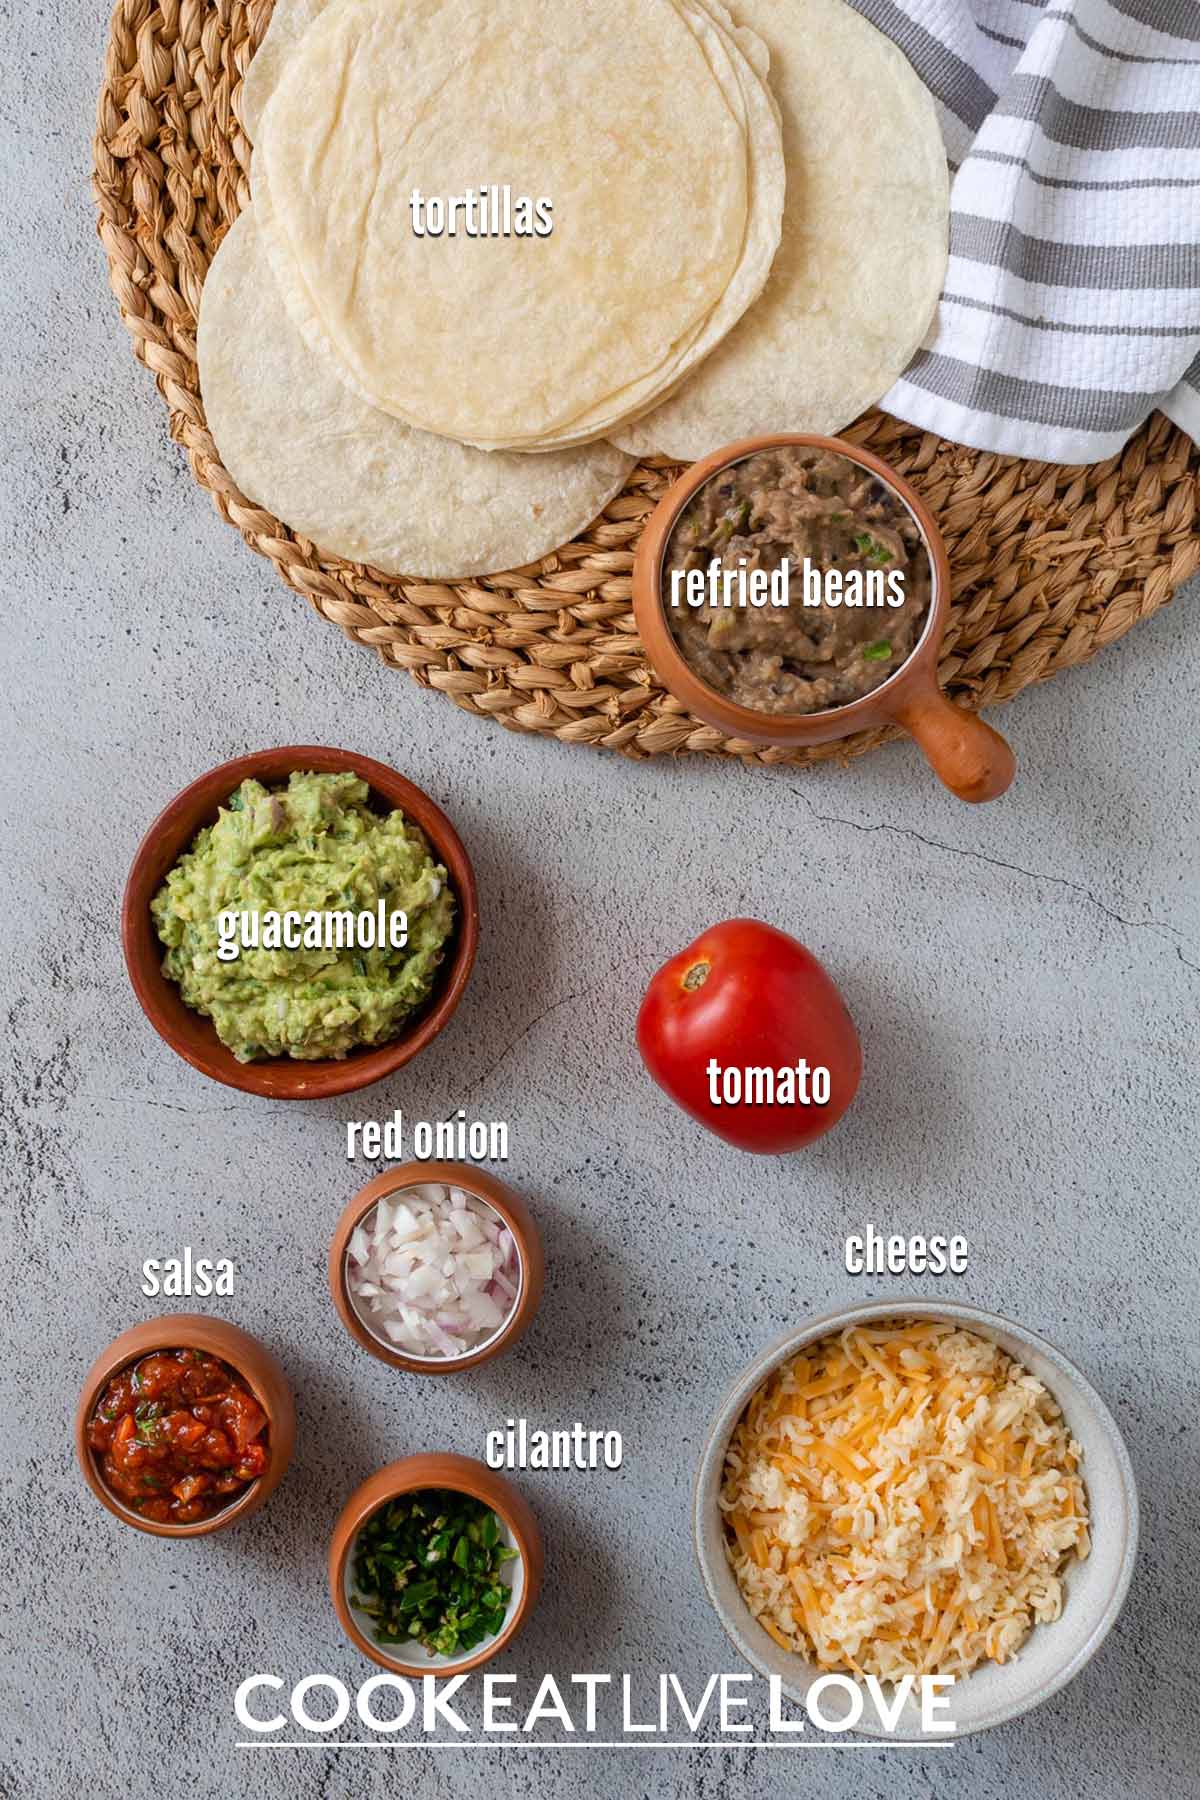 Ingredients for air fryer quesadillas on the table with text labels.